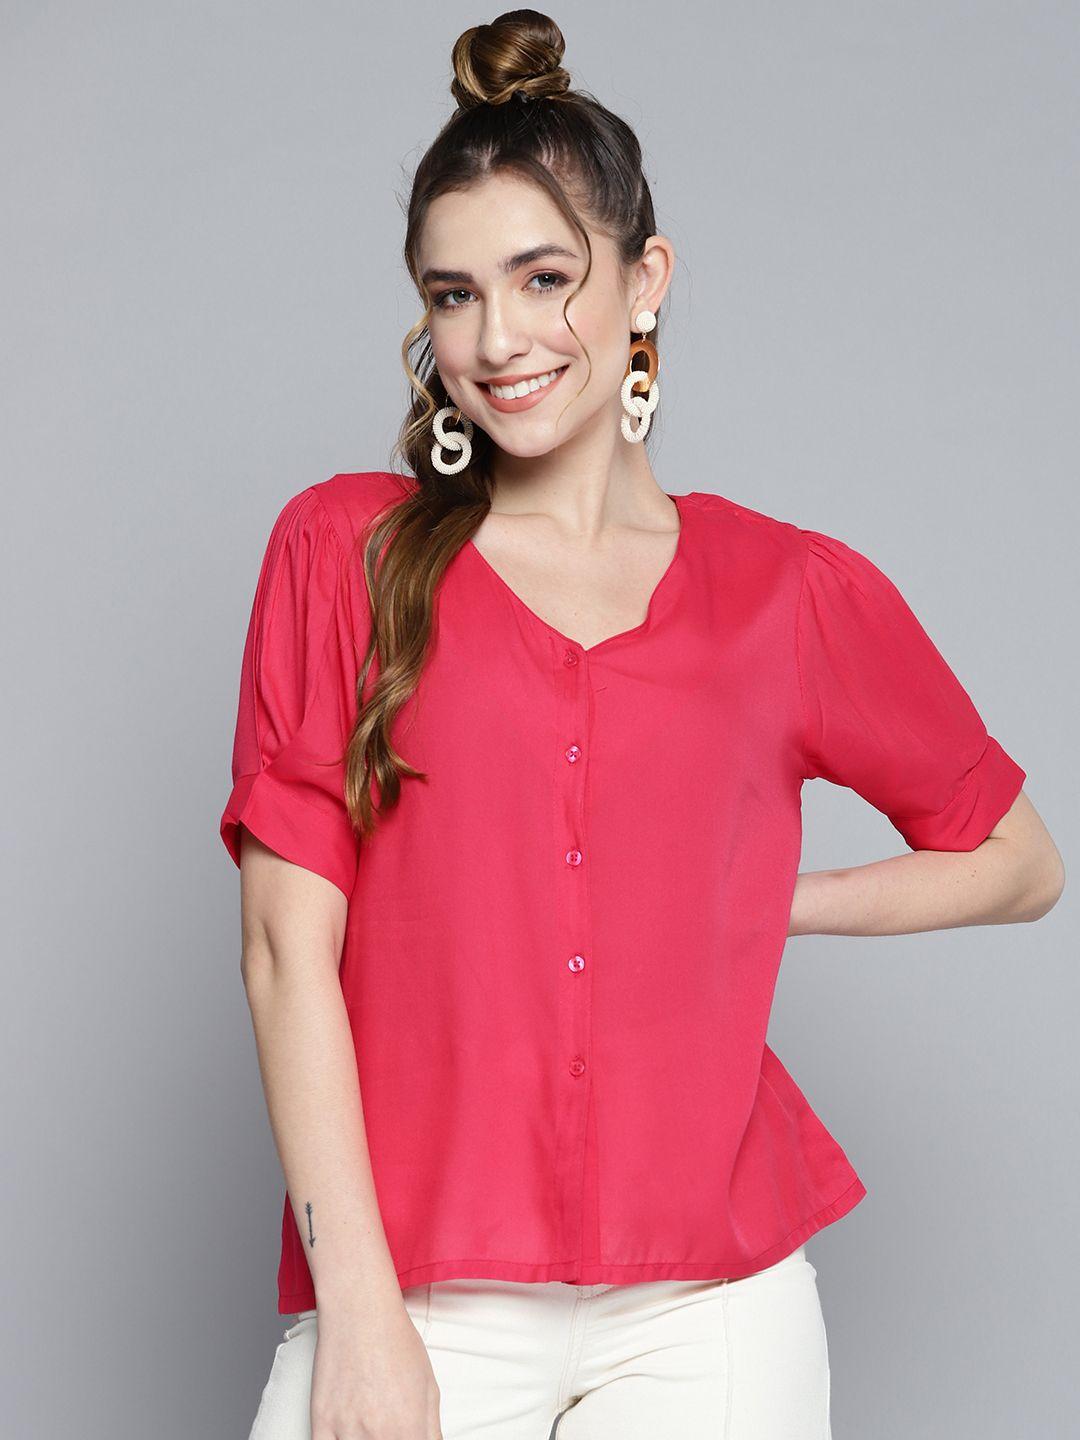 here&now women pink solid shirt style top